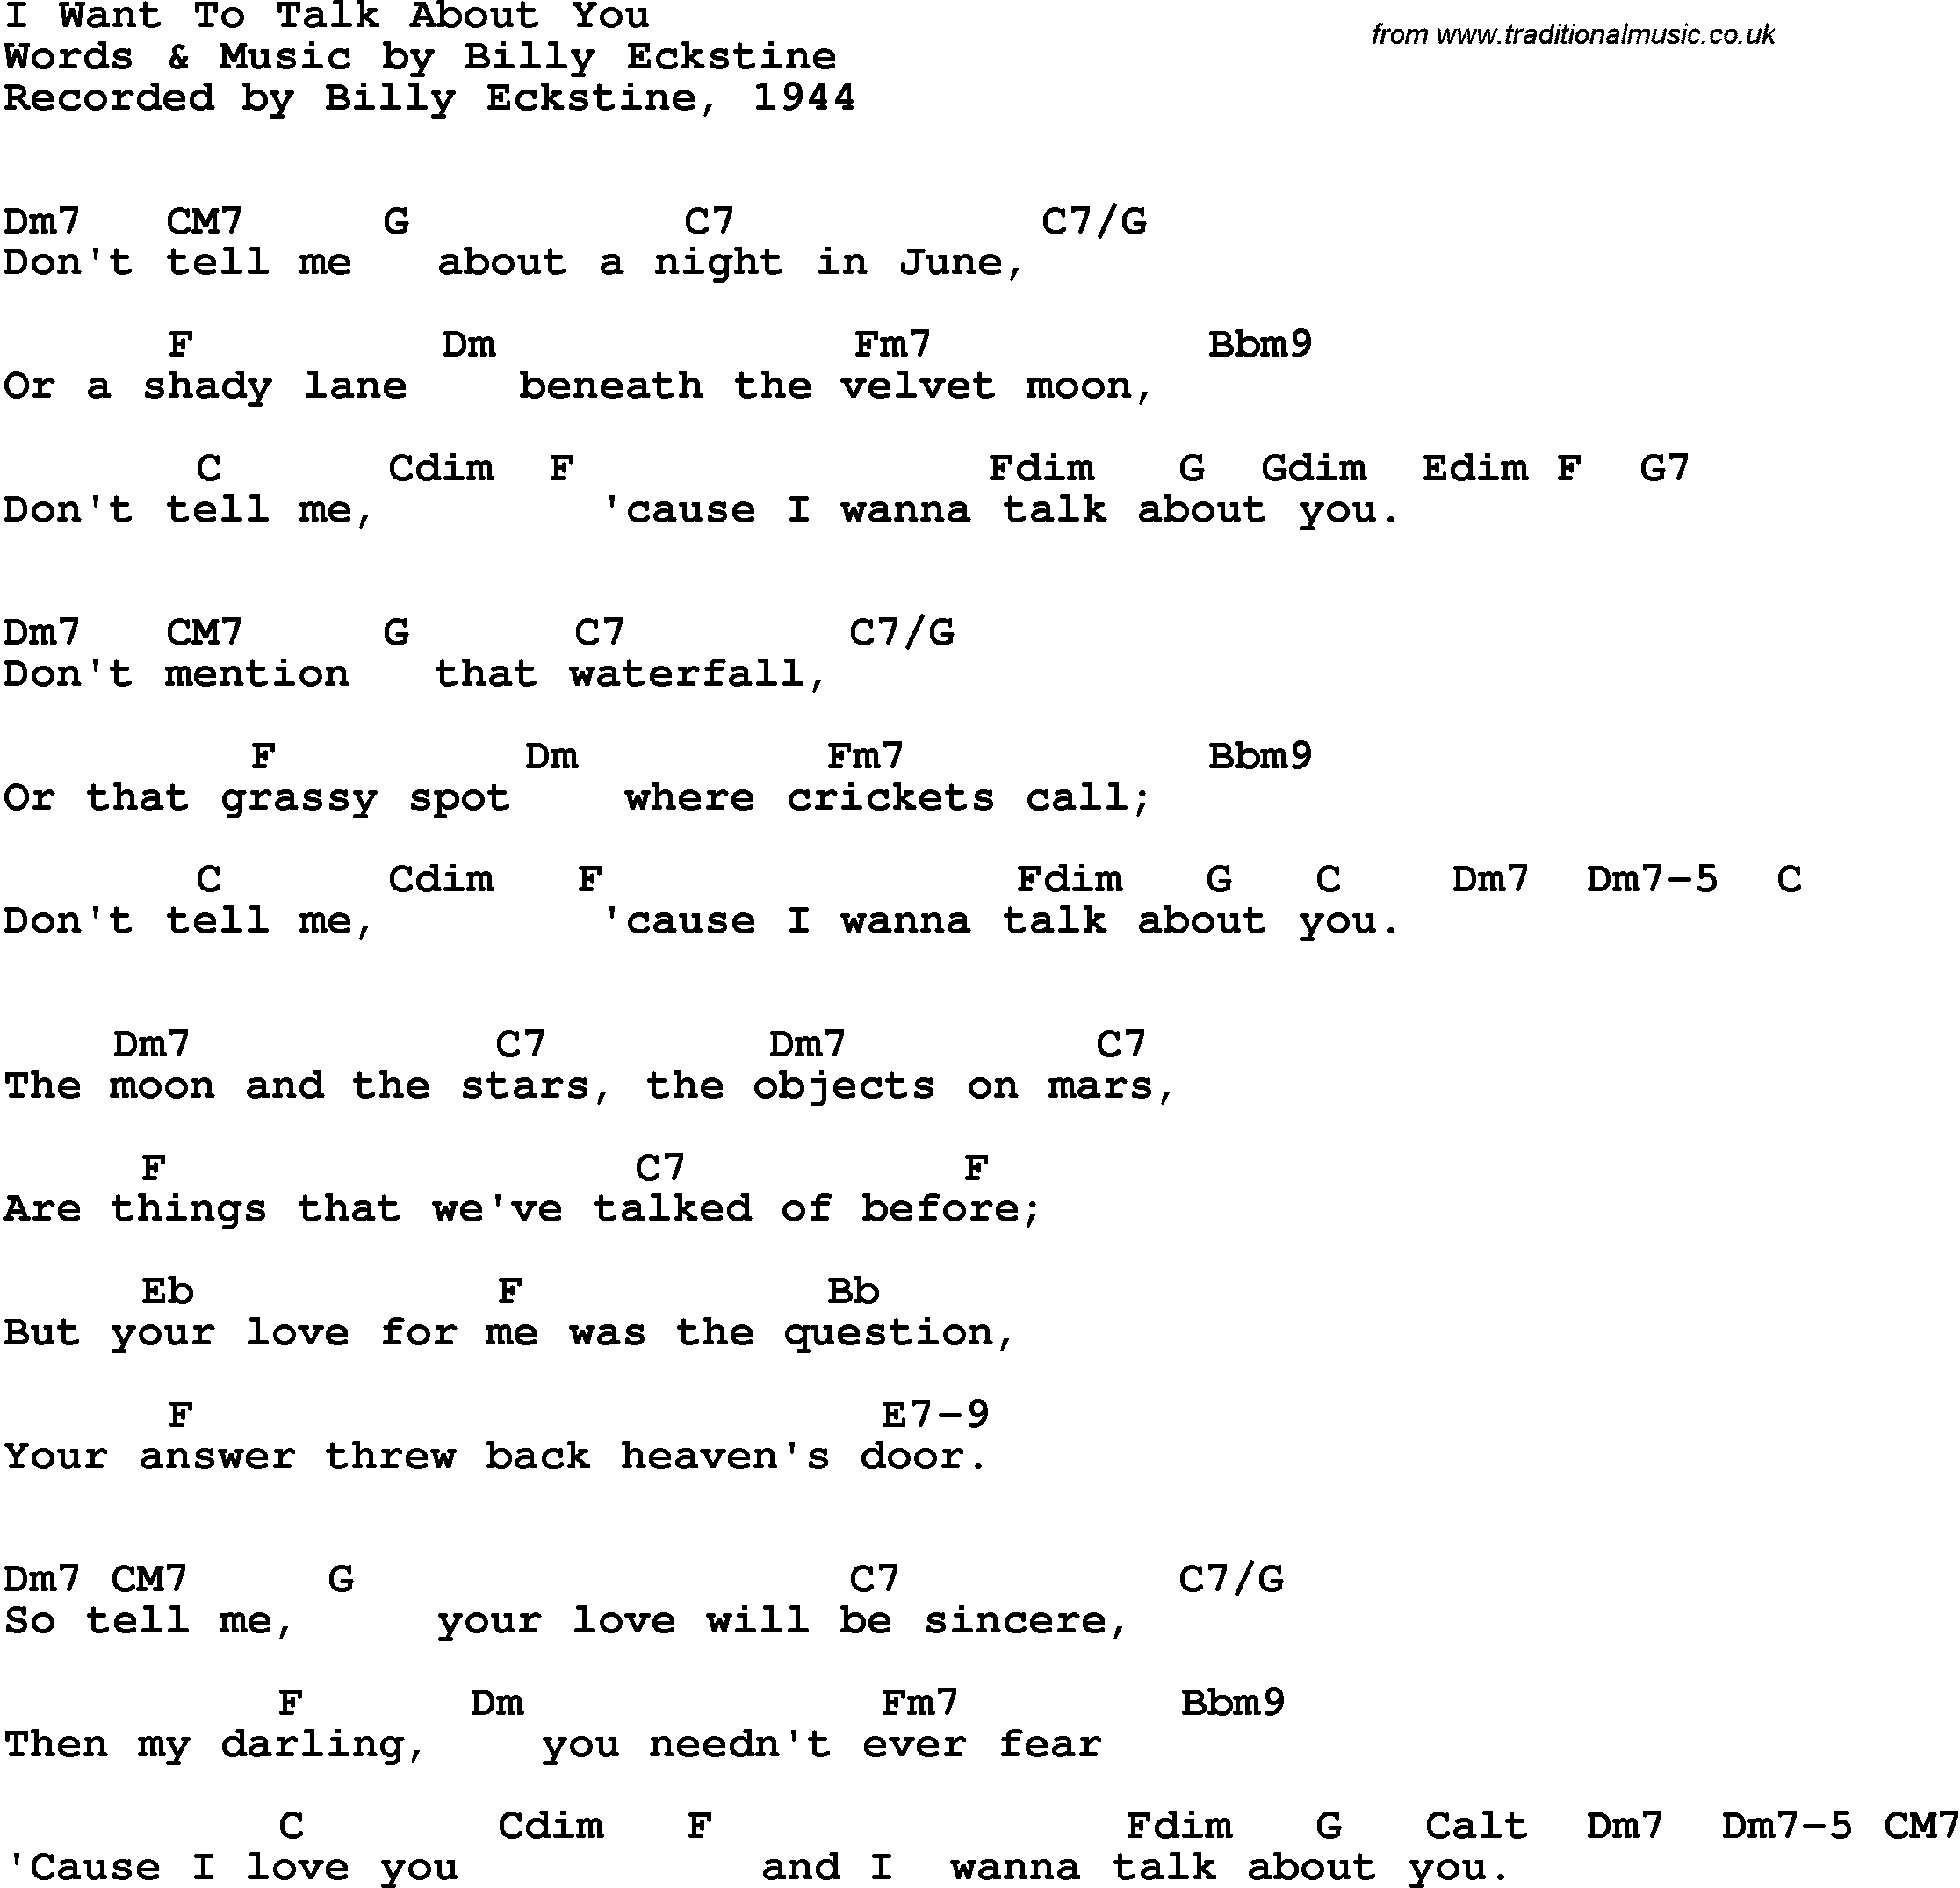 Song Lyrics with guitar chords for I Want To Talk About You - Billy Eckstine, 1944